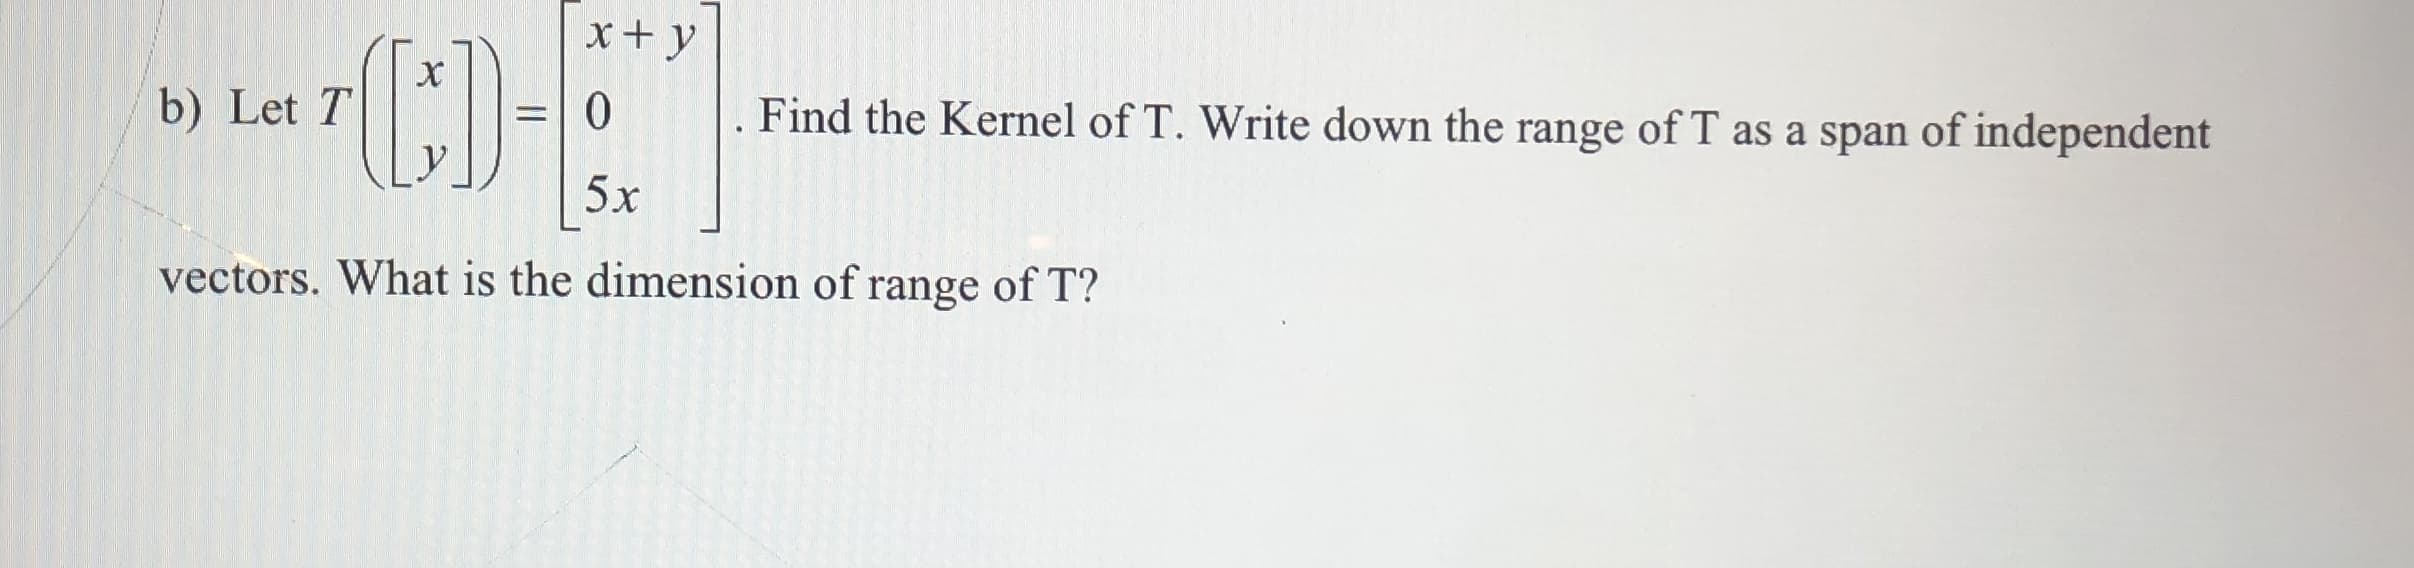 X
b) Let T
10
Find the Kernel of T. Write down the range of T as a span of independent
5x
vectors. What is the dimension of range of T?
